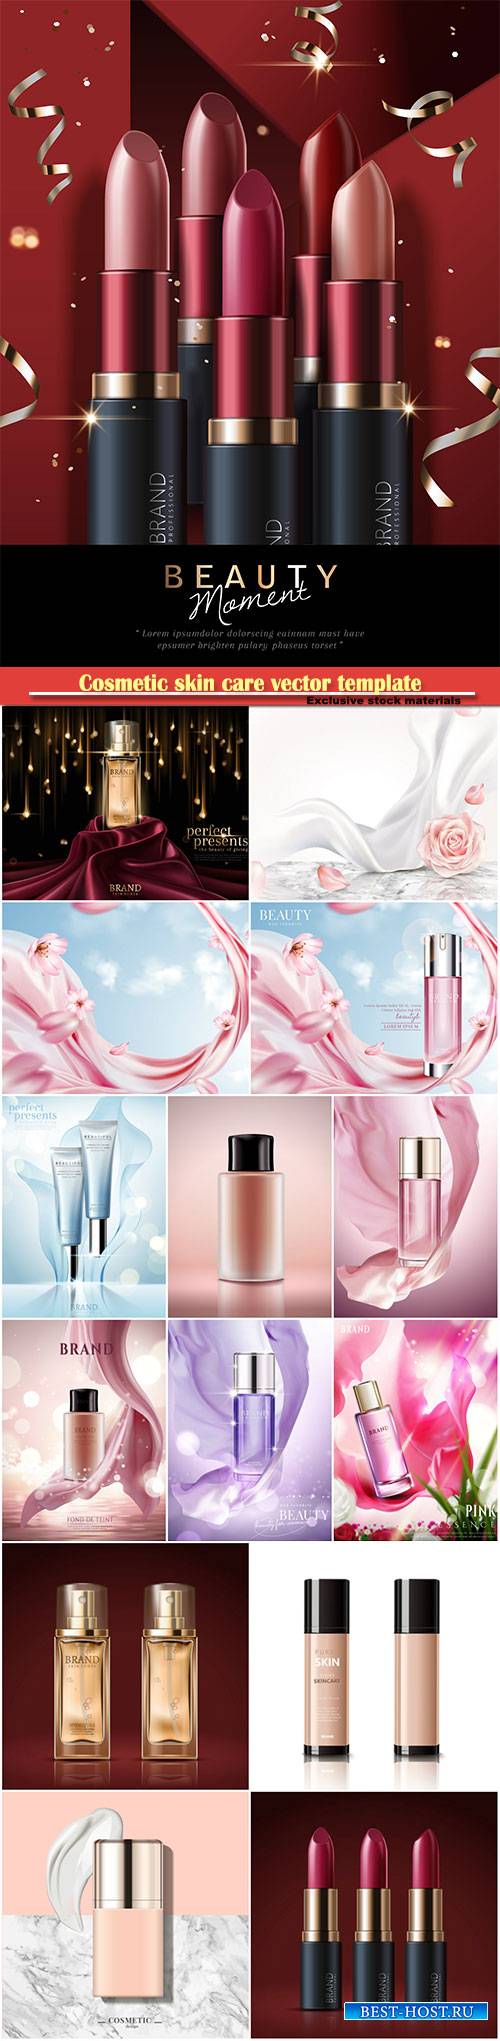 Cosmetic skin care vector template, refreshing skin care tube ads